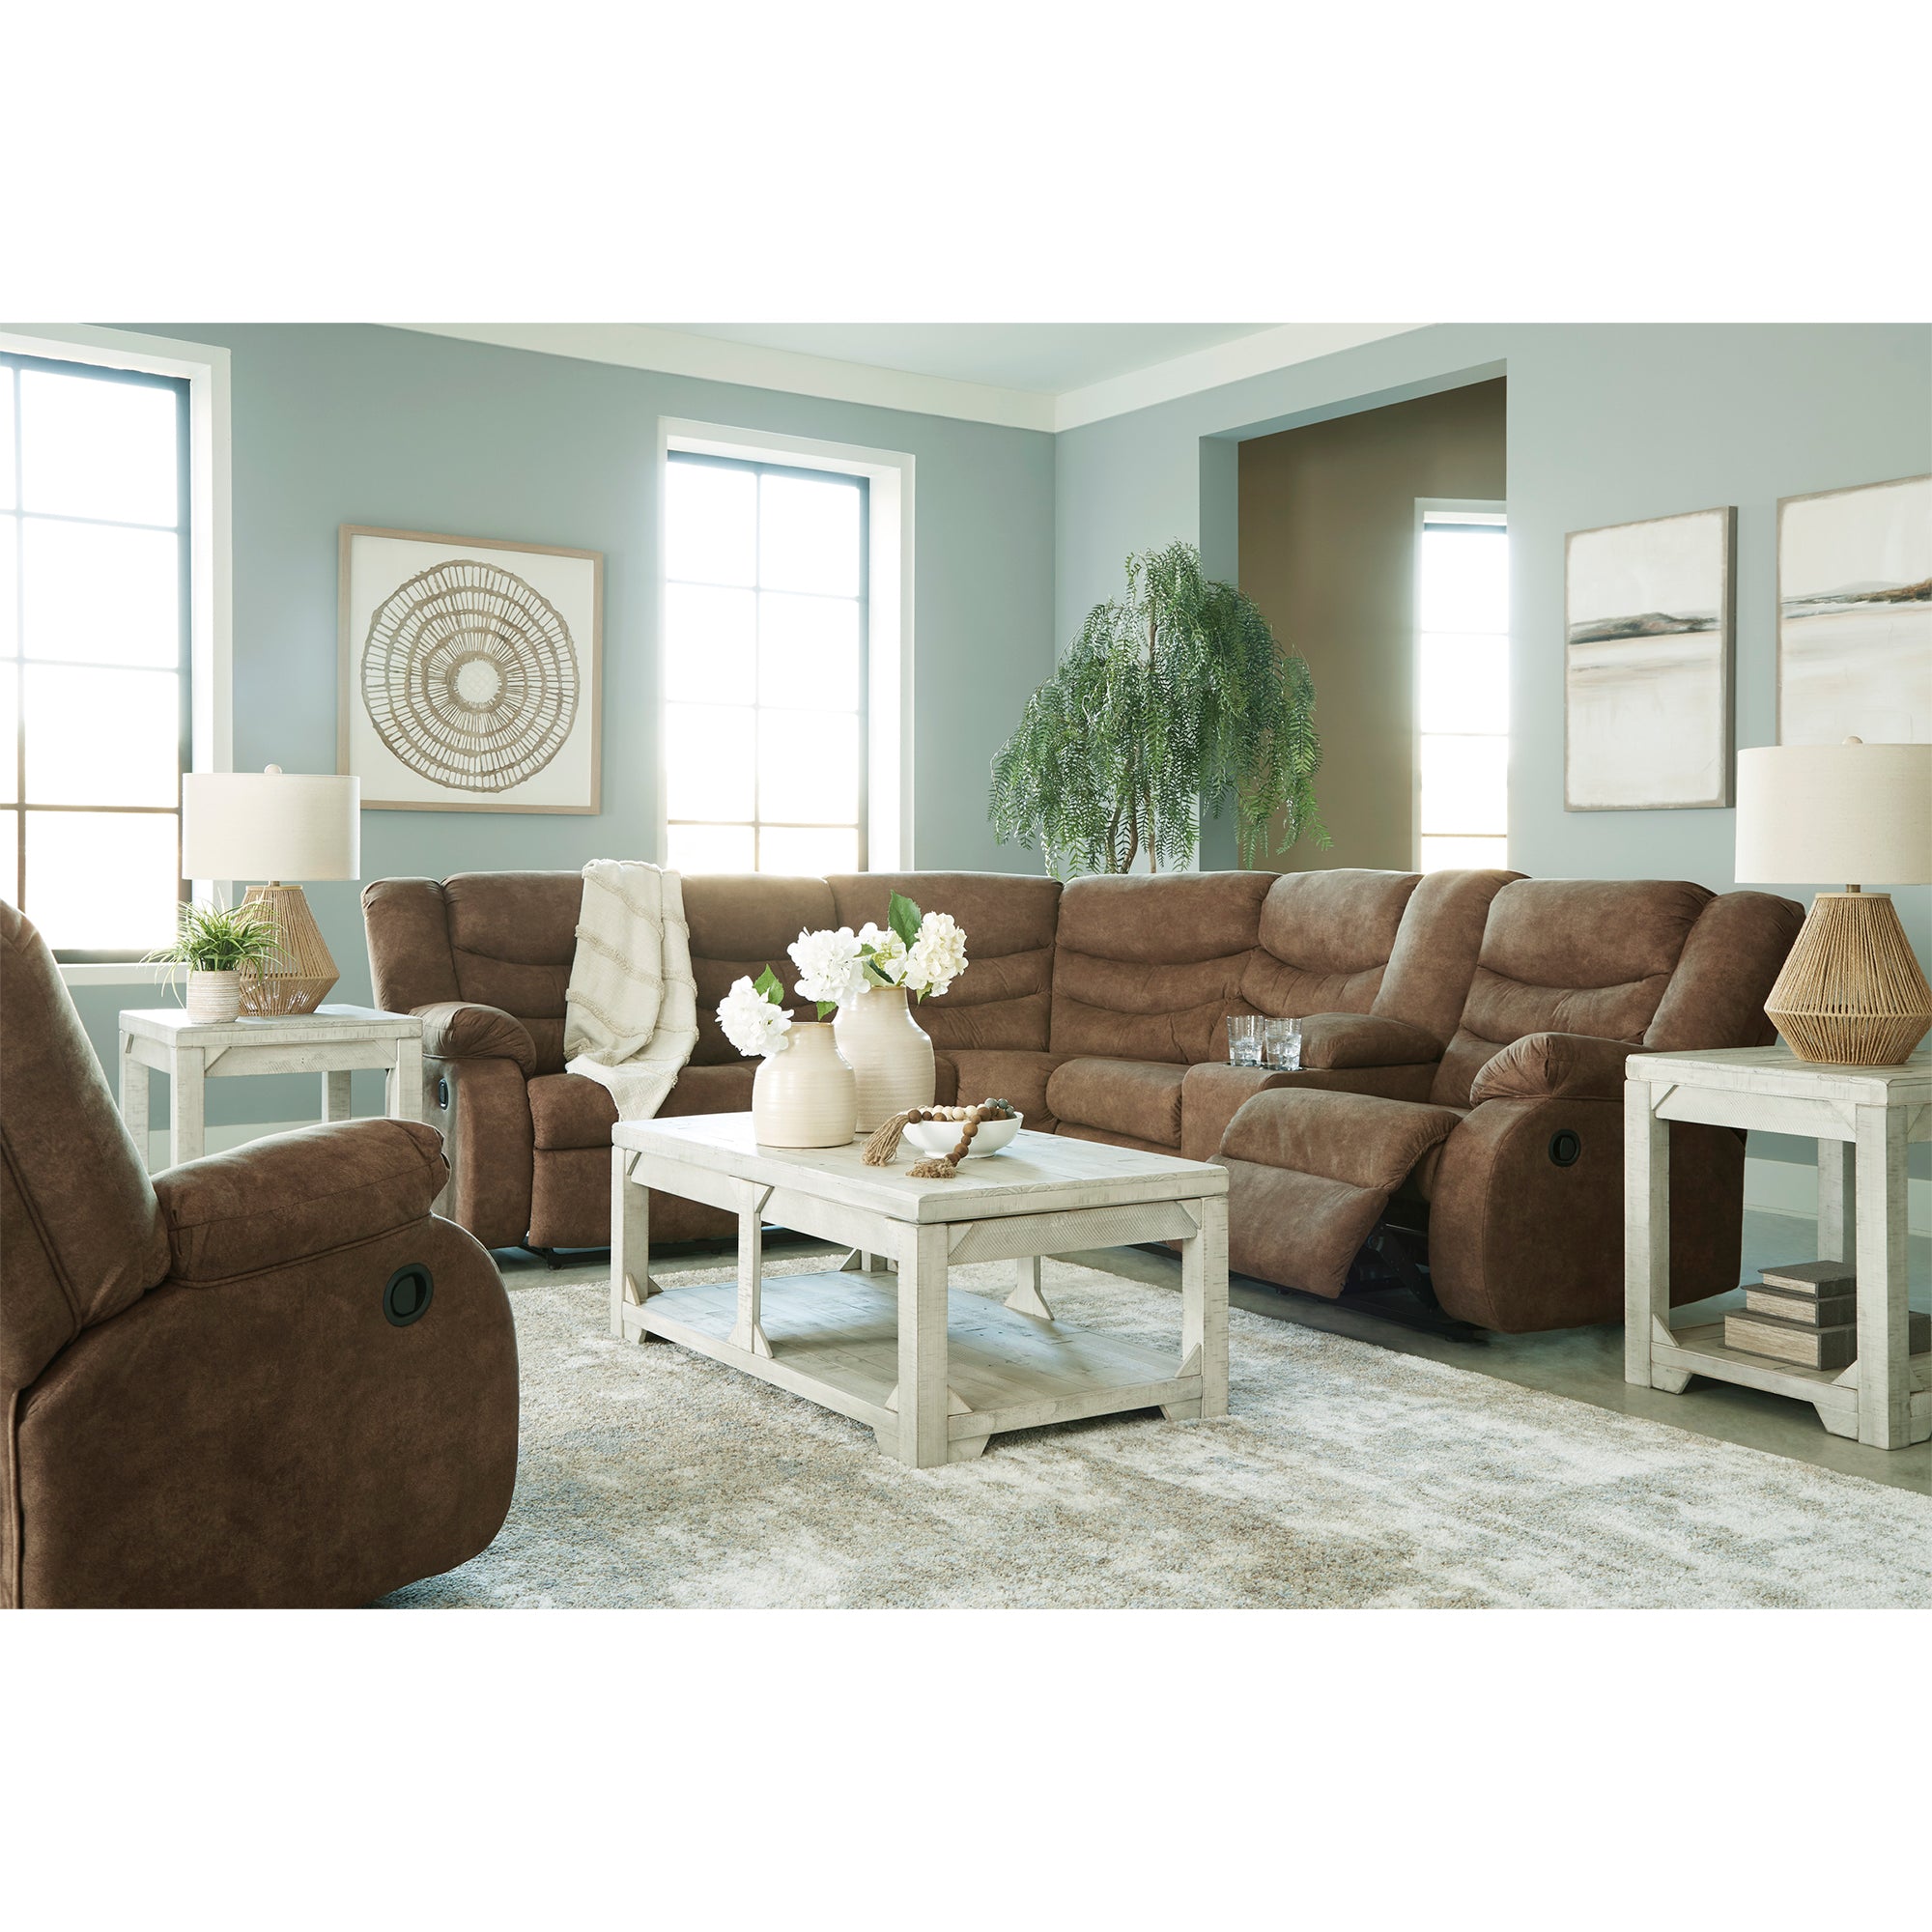 Partymate 2-Piece Reclining Sectional